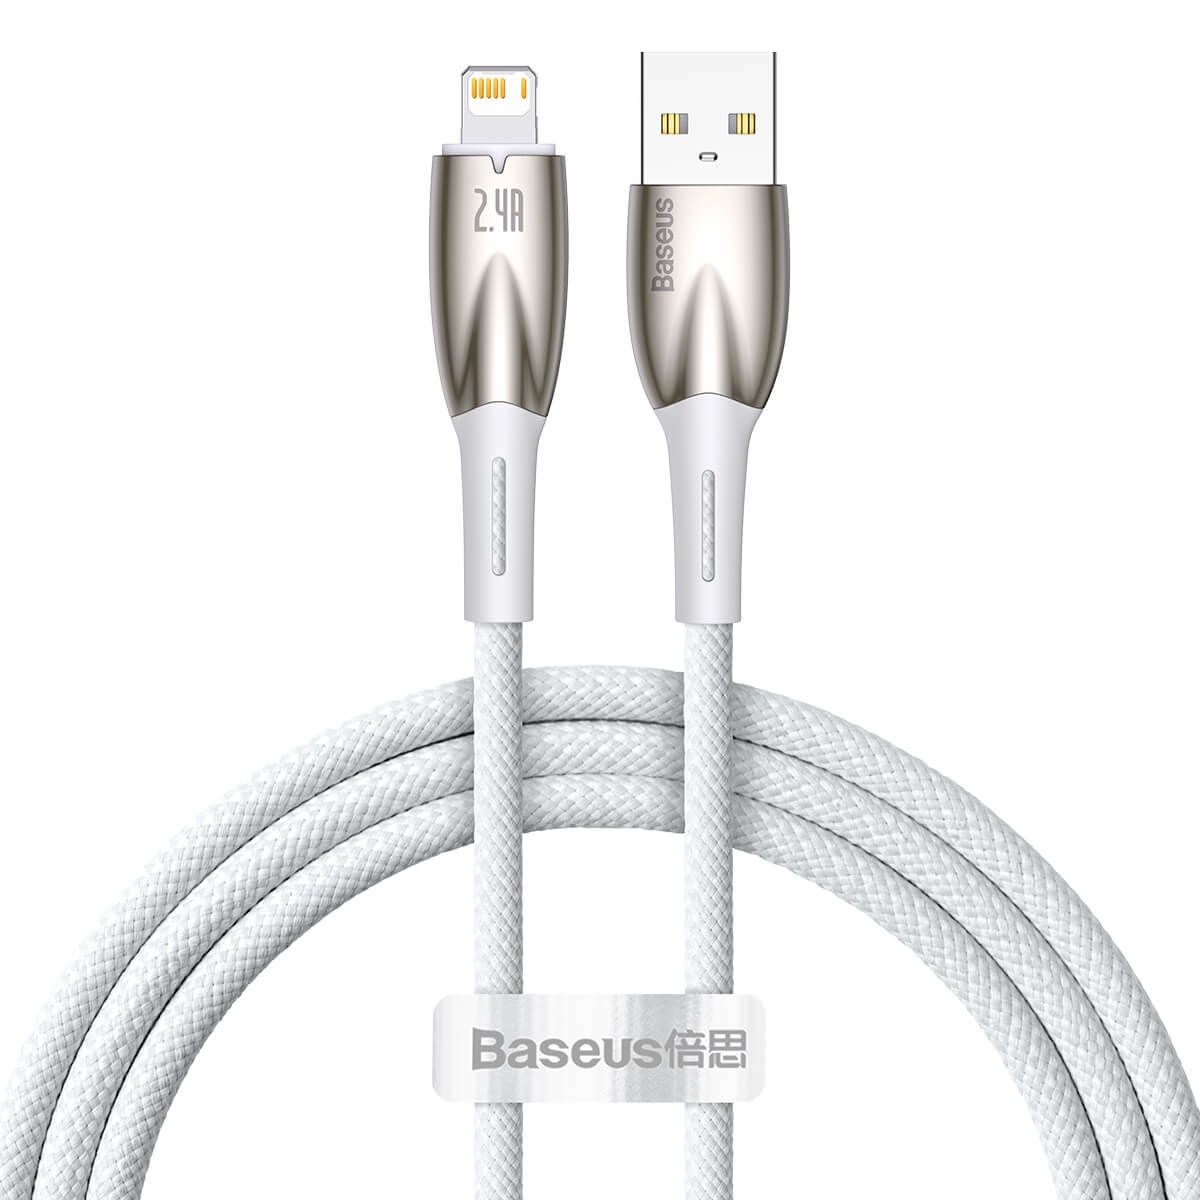 Baseus Glimmer Series Fast Charging Data Cable USB to iPhone 2.4A